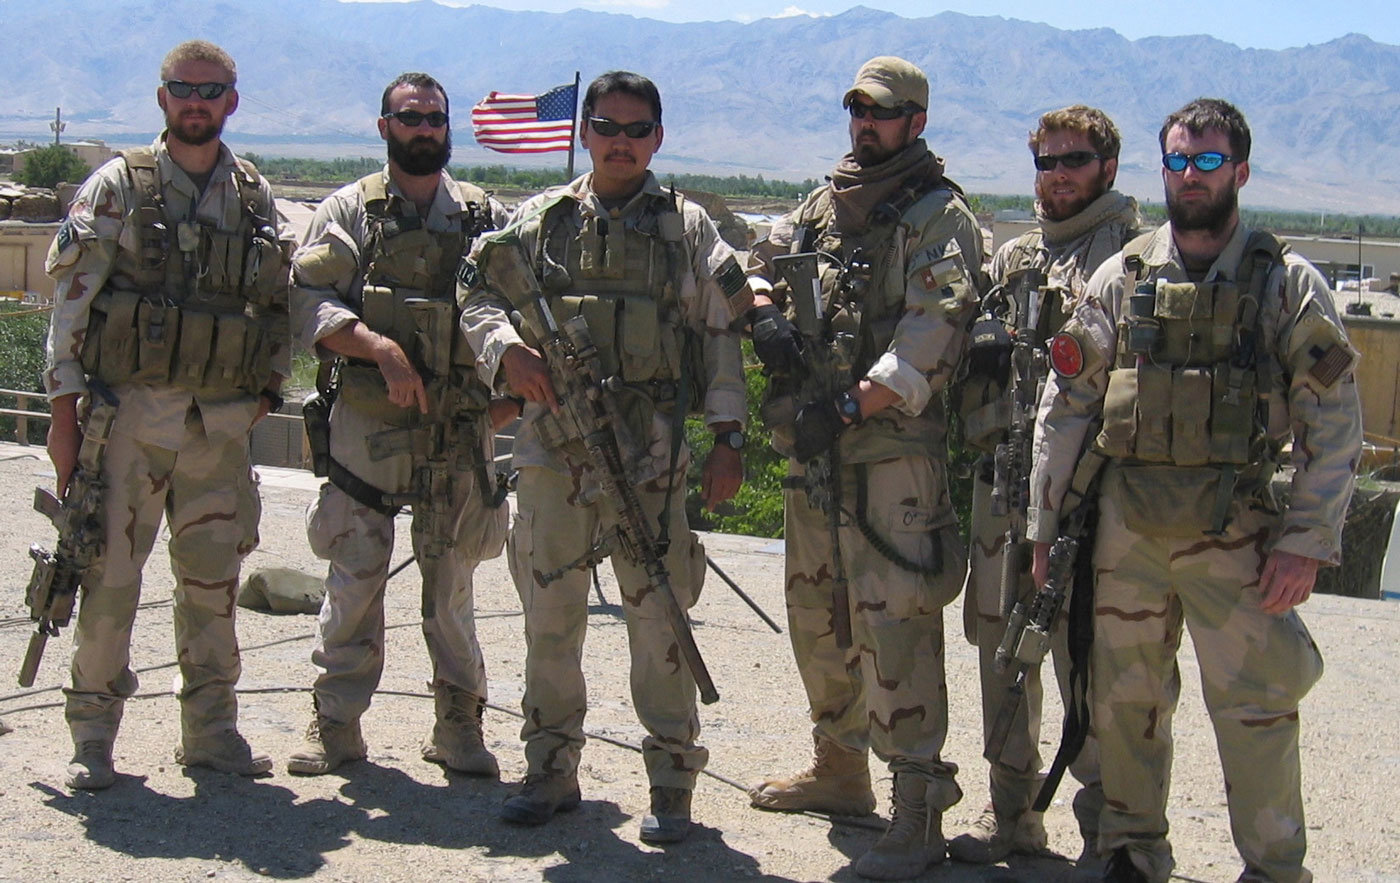 Navy SEALs (Sea, Air, Land) operating in Afghanistan in support of Operation Enduring Freedom. From left to right: Sonar Technician Surface 2nd Class (SEAL) Matthew G. Axelson, 29, of Cupertino, Calif.; Information Systems Technician Senior Chief (SEAL) Daniel R. Healy, 36, of Exeter, N.H.; Quartermaster 2nd Class (SEAL) James Suh, 28, of Deerfield Beach, Fla.; Hospital Corpsman Second Class (SEAL) Marcus Luttrell; Machinist Mate 2nd Class (SEAL) Eric S. Patton, 22, of Boulder City, Nev.; Lt. (SEAL) Michael P. Murphy, 29, of Patchogue, N.Y.